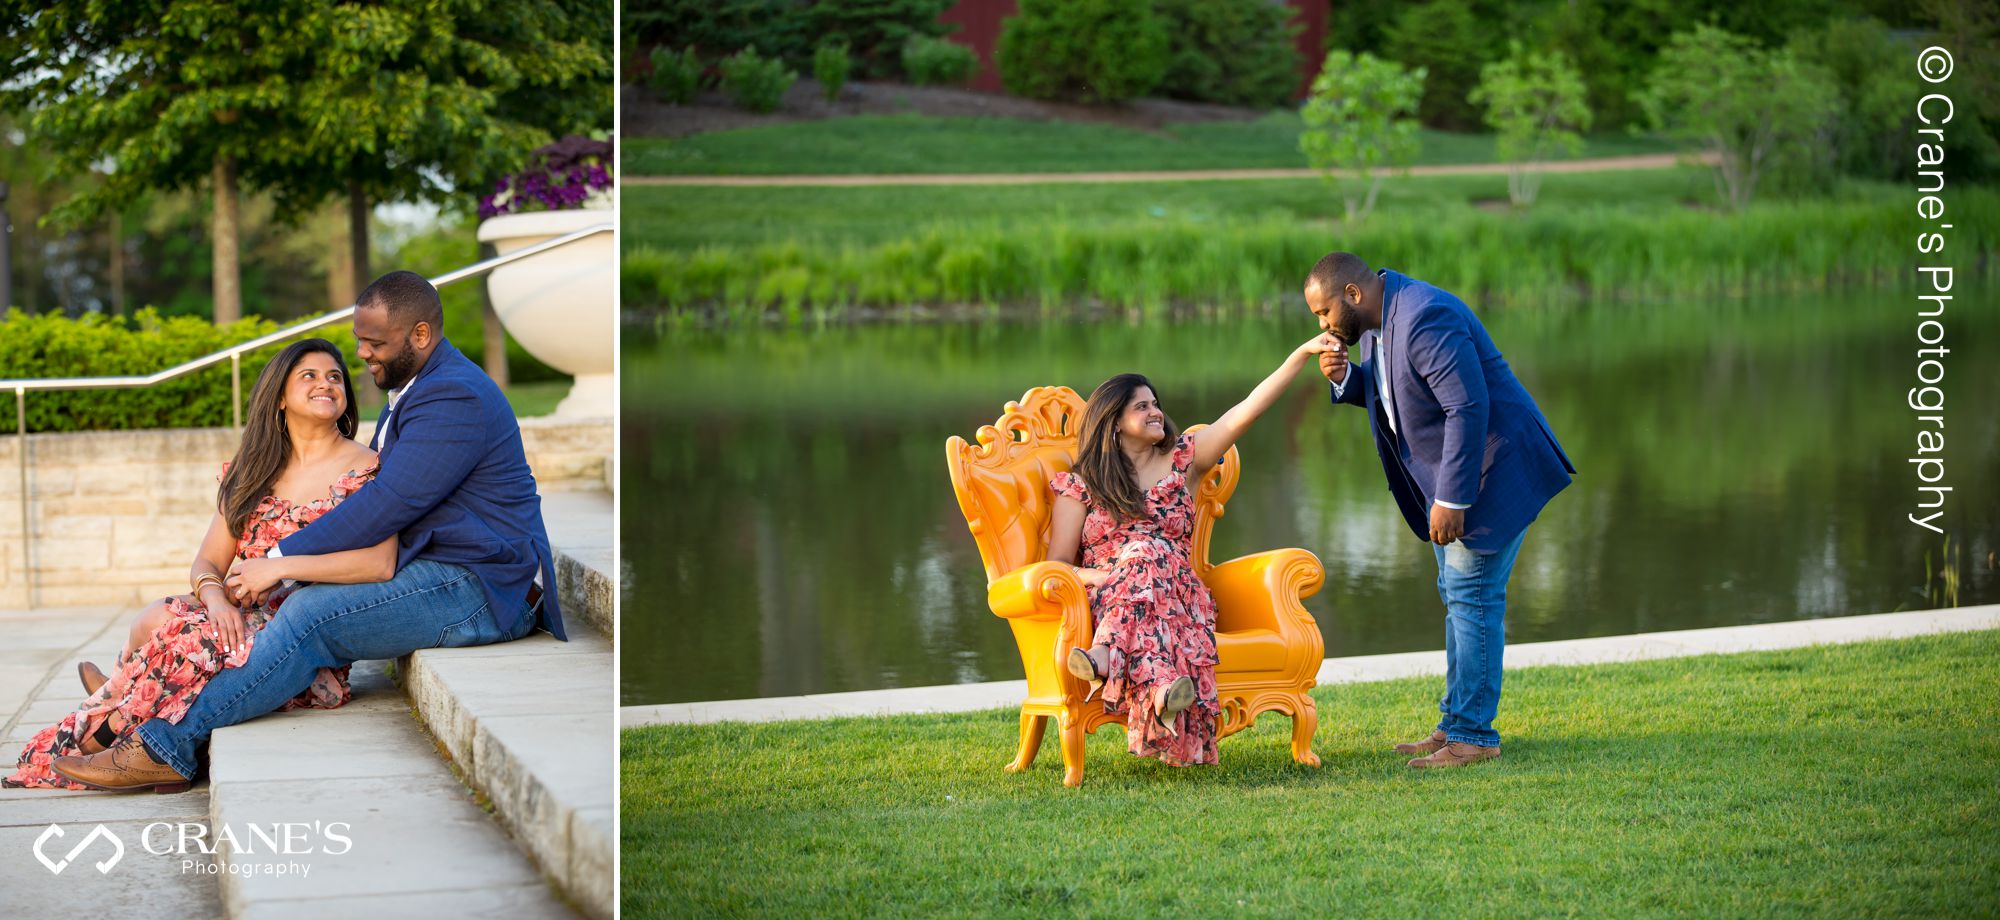 An engagement photo of couple sitting on a fancy yellow chair.